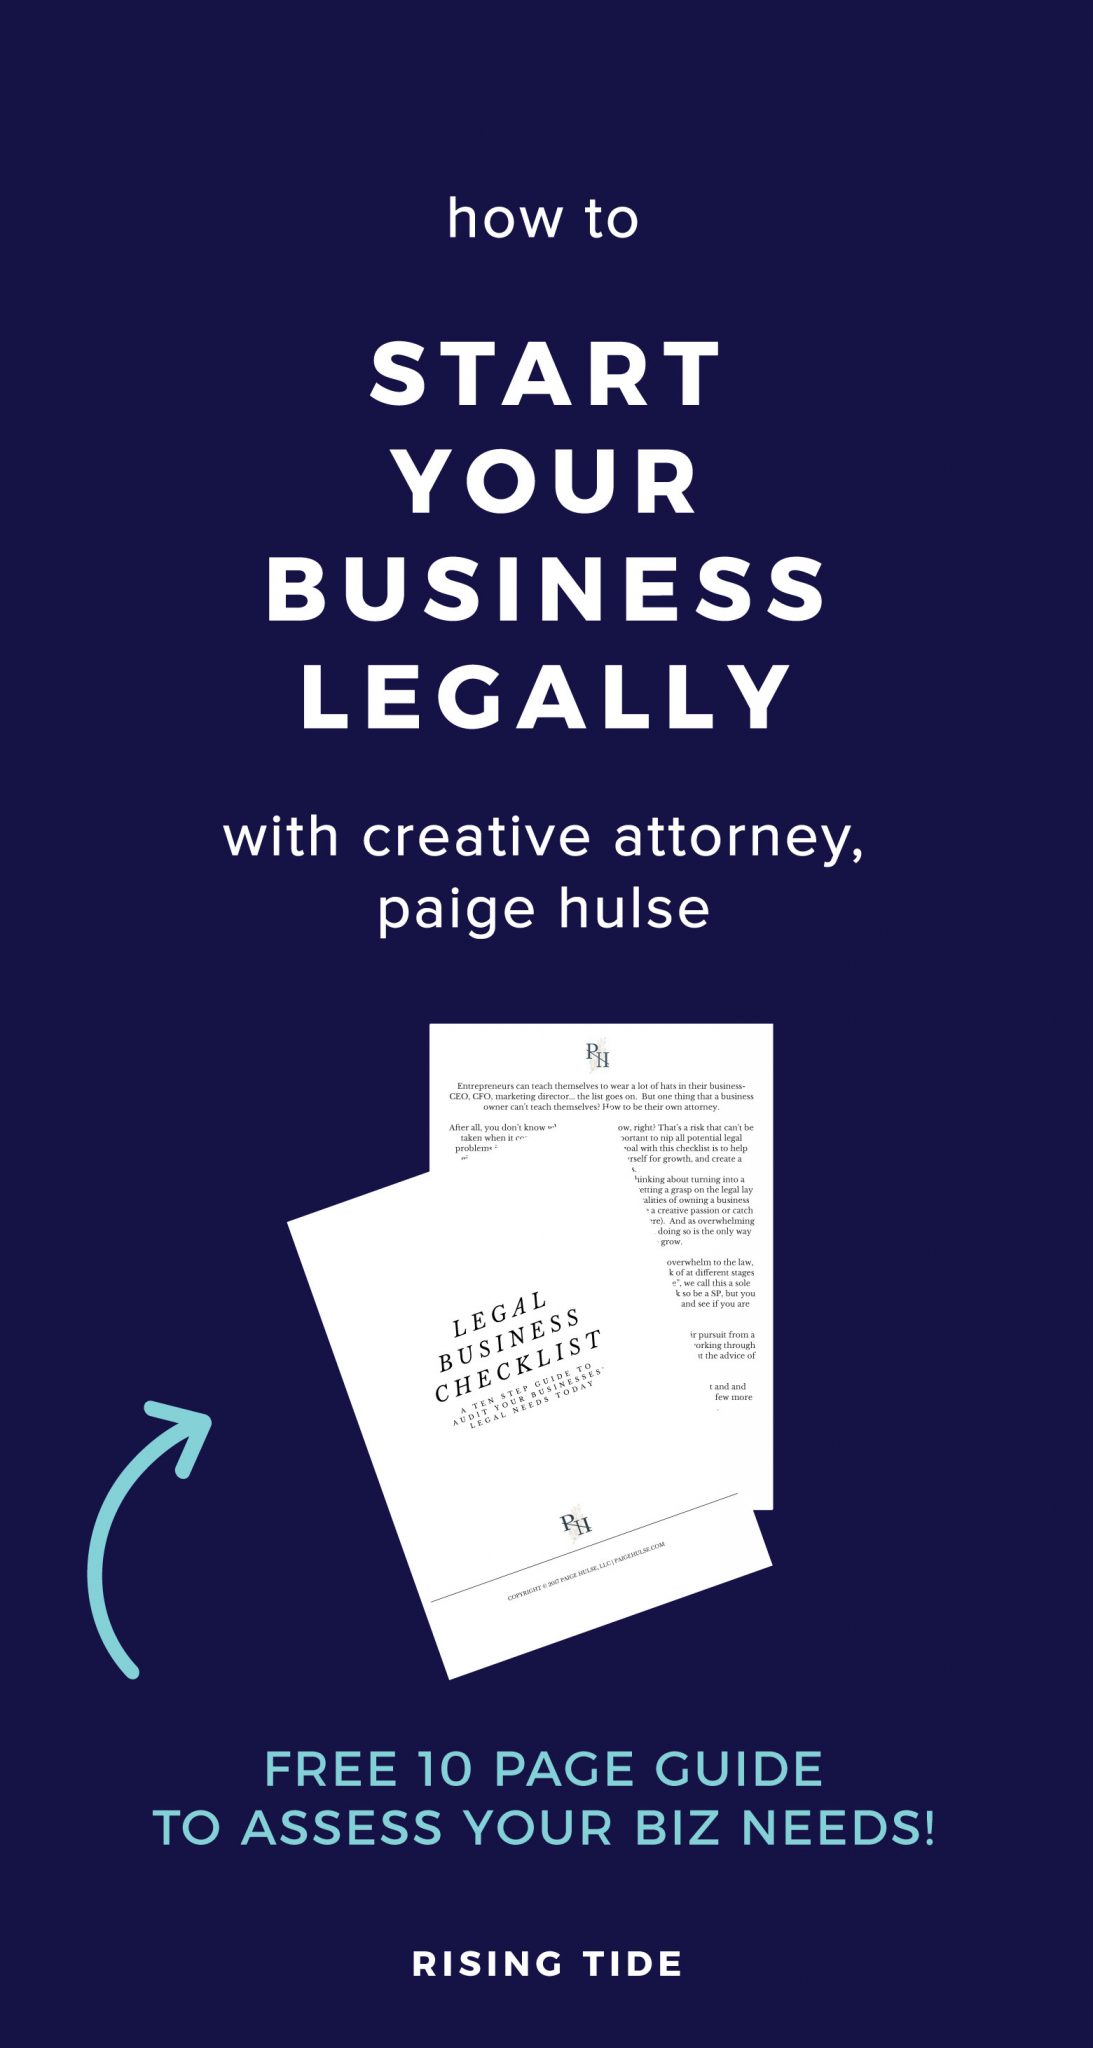 how to start your creative business legally, free guide to assess your business' legal needs, llc, sole-proprietor, dba, business legal checklist